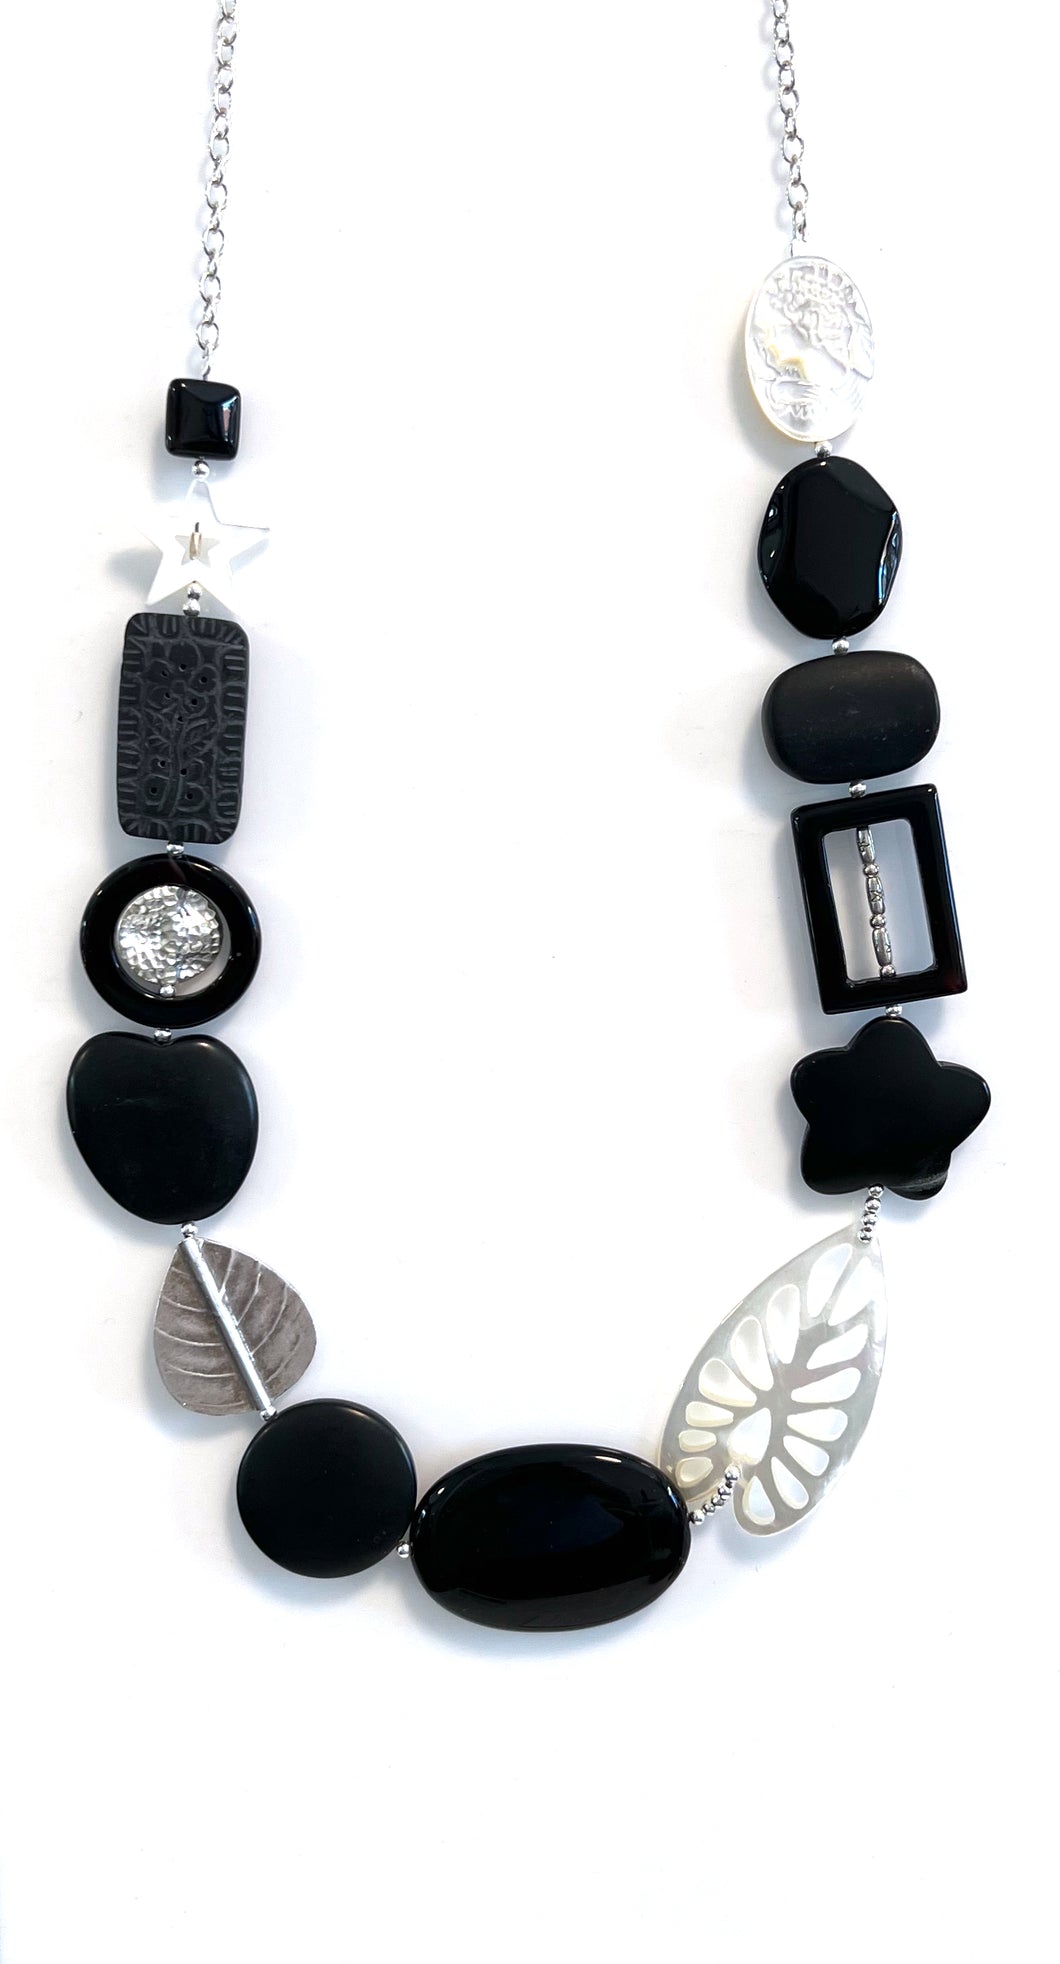 Australian Handmade Black Necklace with Onyx Matt Black Jade Mother of Pearl Agate and Sterling Silver